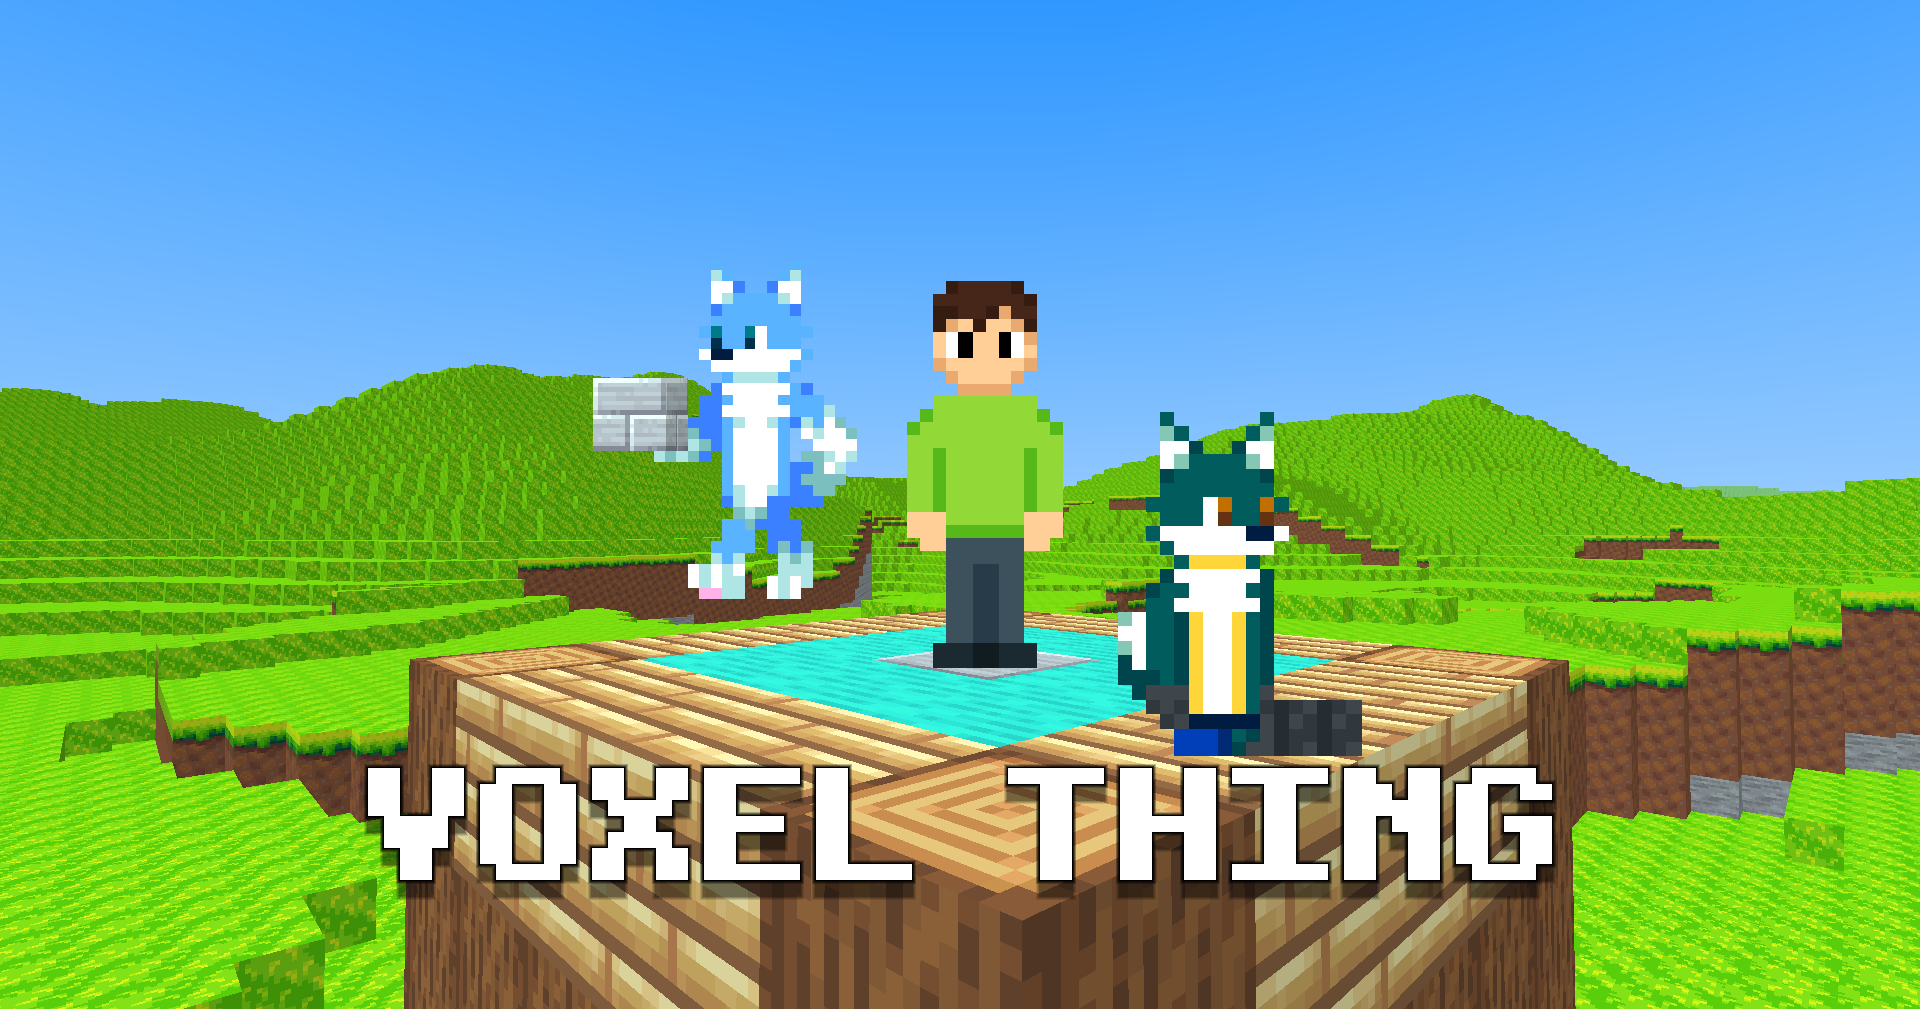 VOXEL THING